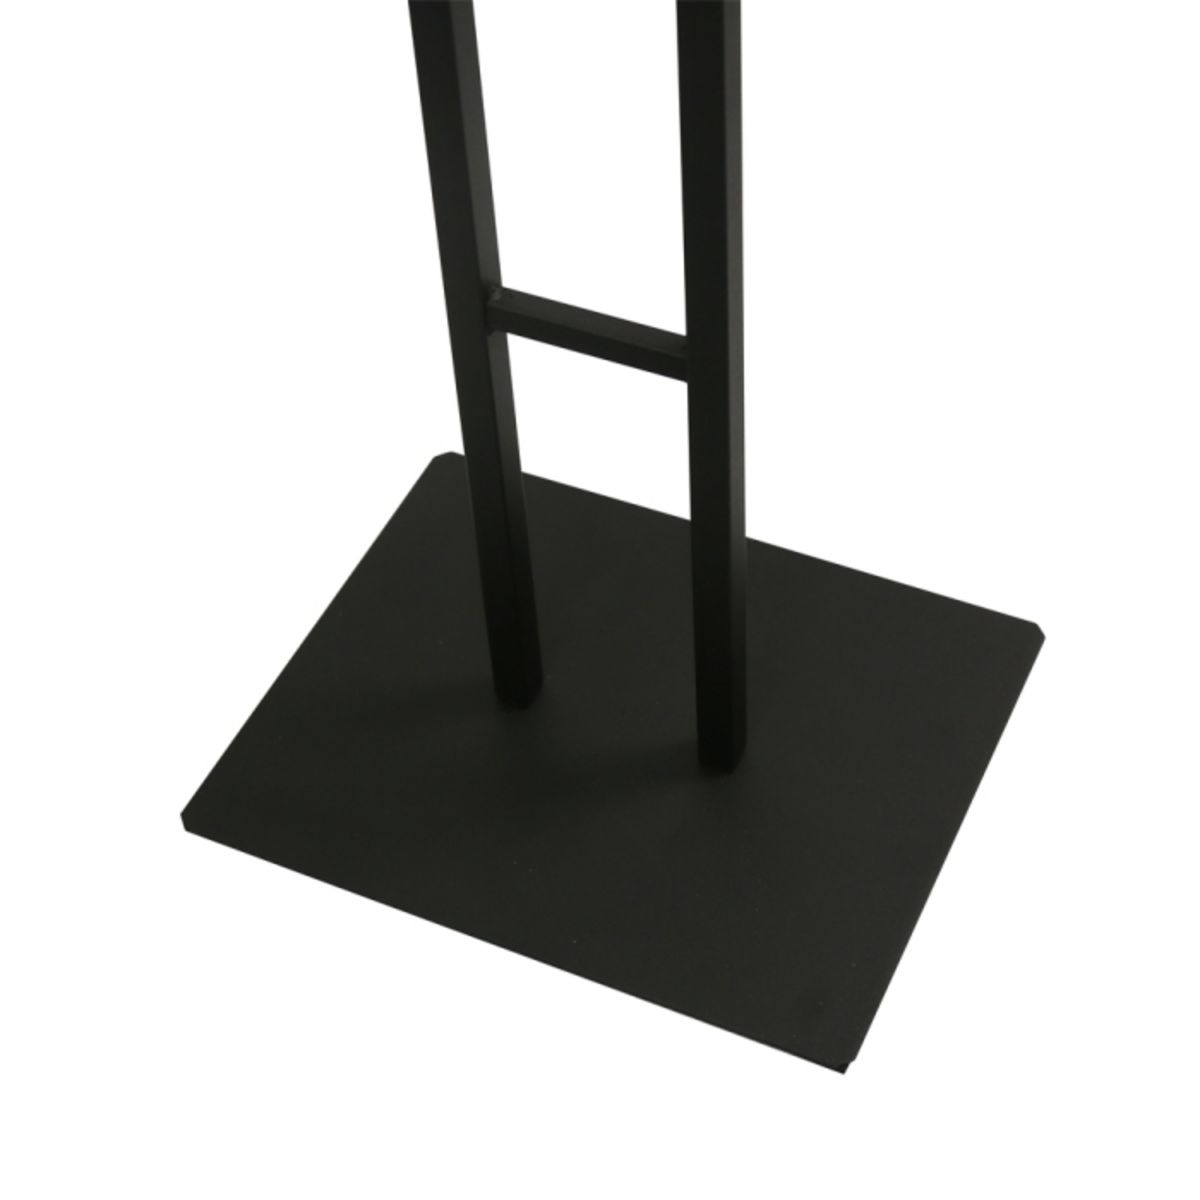 Metal display easel with a sturdy black frame.png